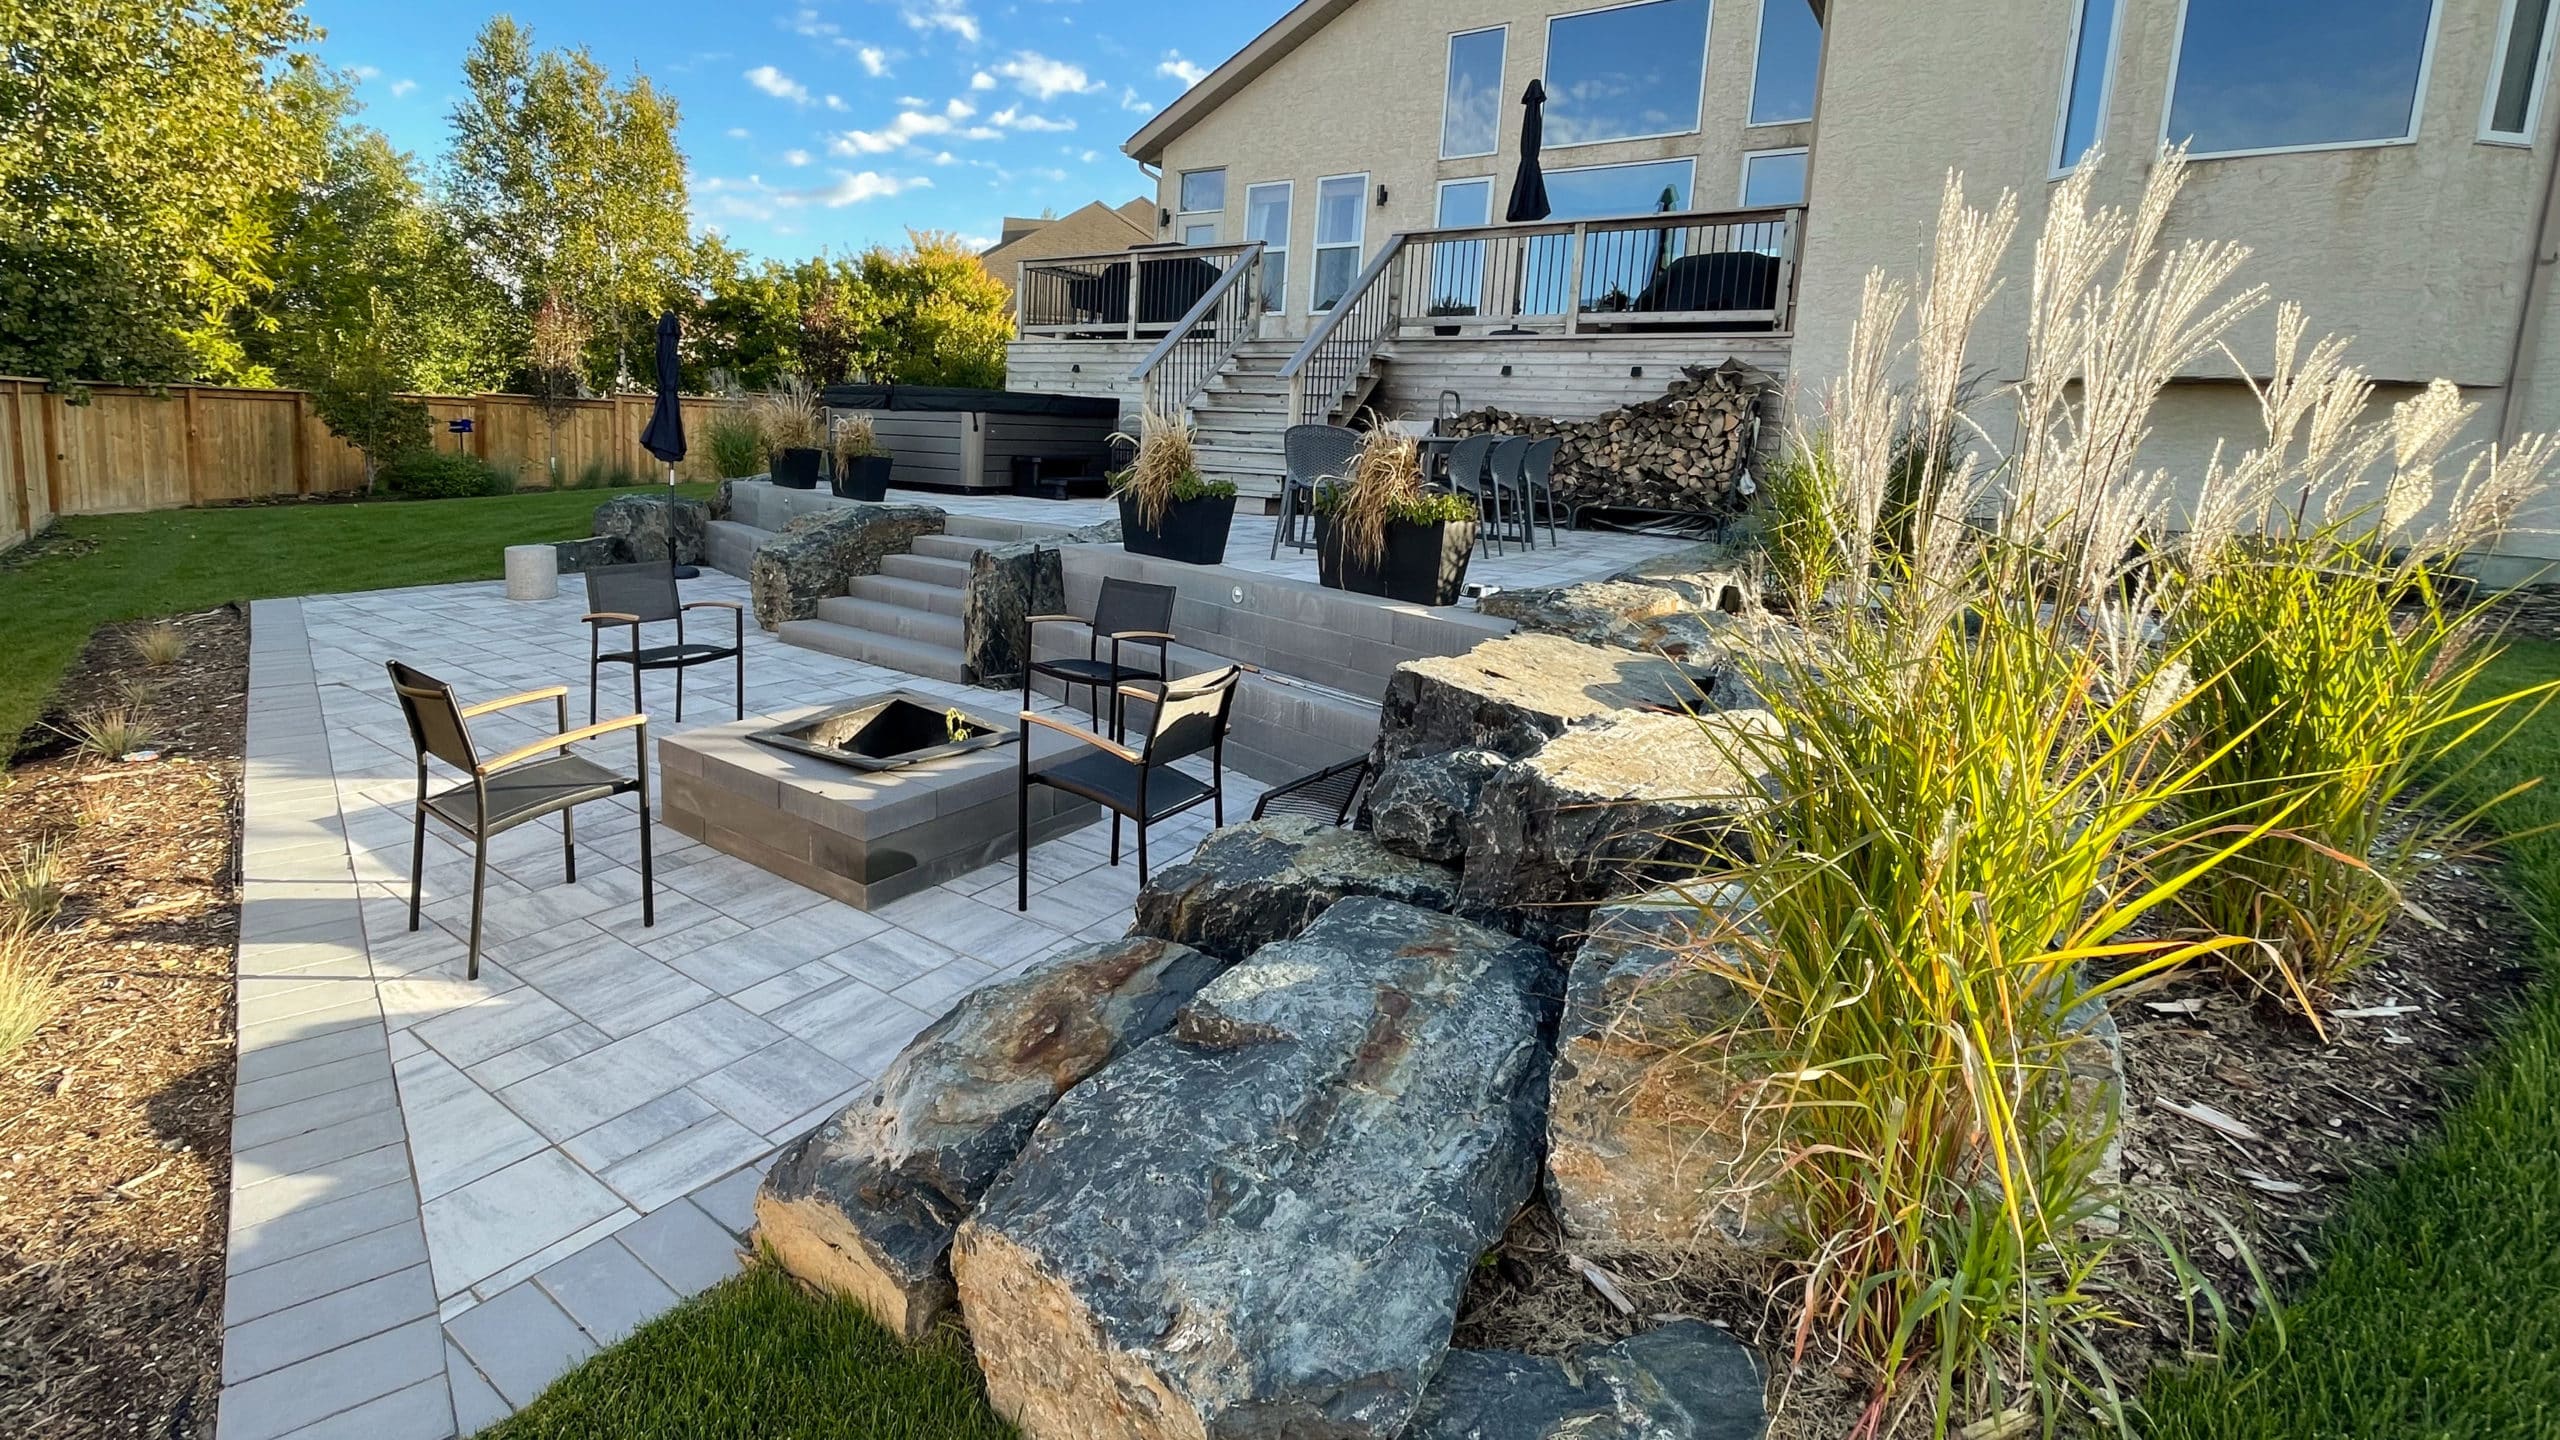 Designed and build landscaping in a Winnipeg backyard.